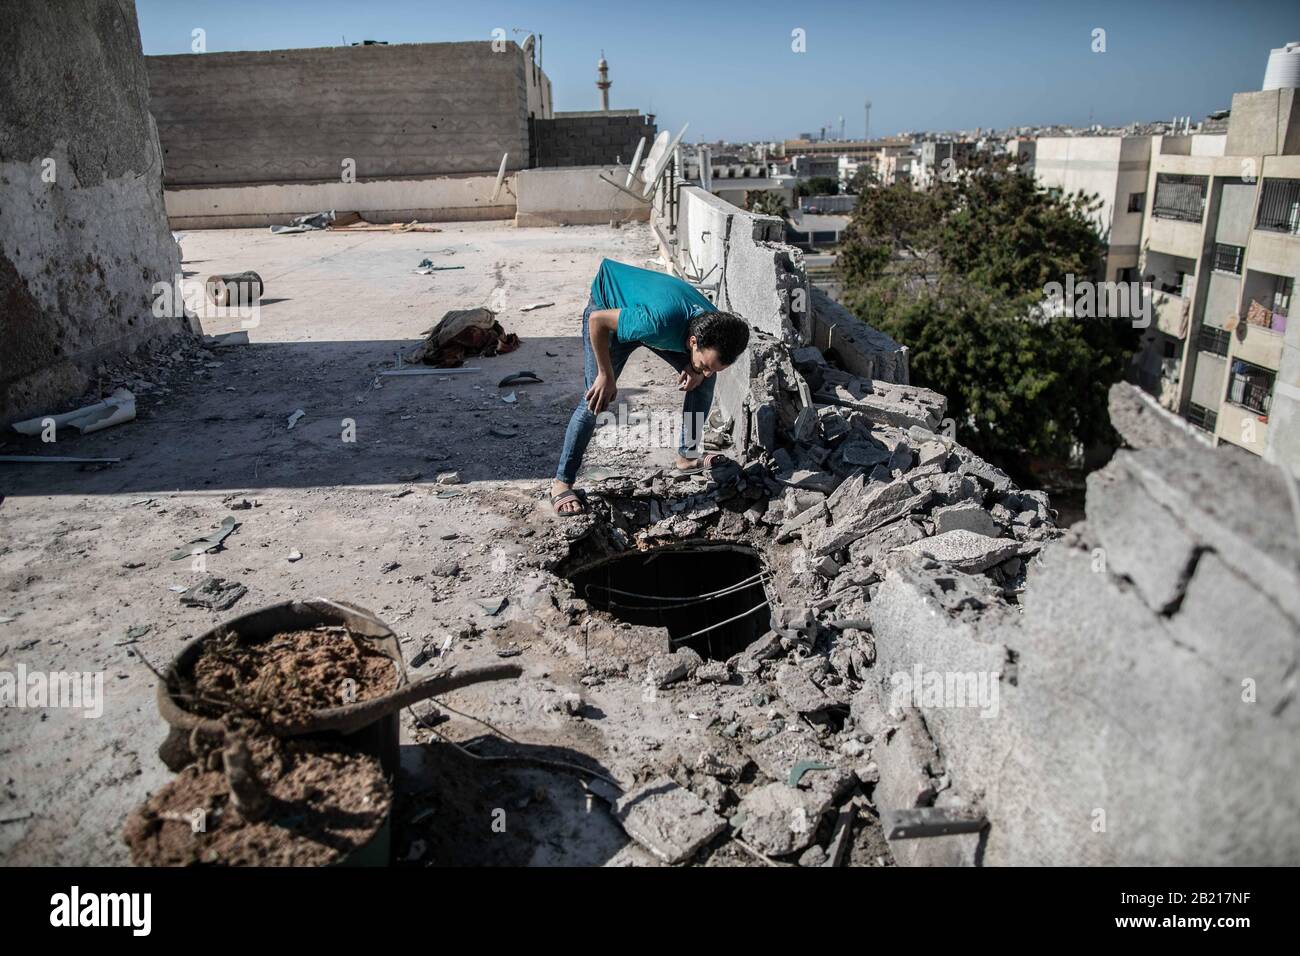 Tripoli, Libya. 28th Feb, 2020. A man inspects the damage in a building after a heavy shelling attack in Tripoli, Libya, on Feb. 28, 2020. The forces of the UN-backed Libyan government said on Friday that the rival east-based army attacked the Mitiga International Airport and its surroundings, as well as a number of residential neighborhoods, in Tripoli with heavy shelling. Credit: Amru Salahuddien/Xinhua/Alamy Live News Stock Photo